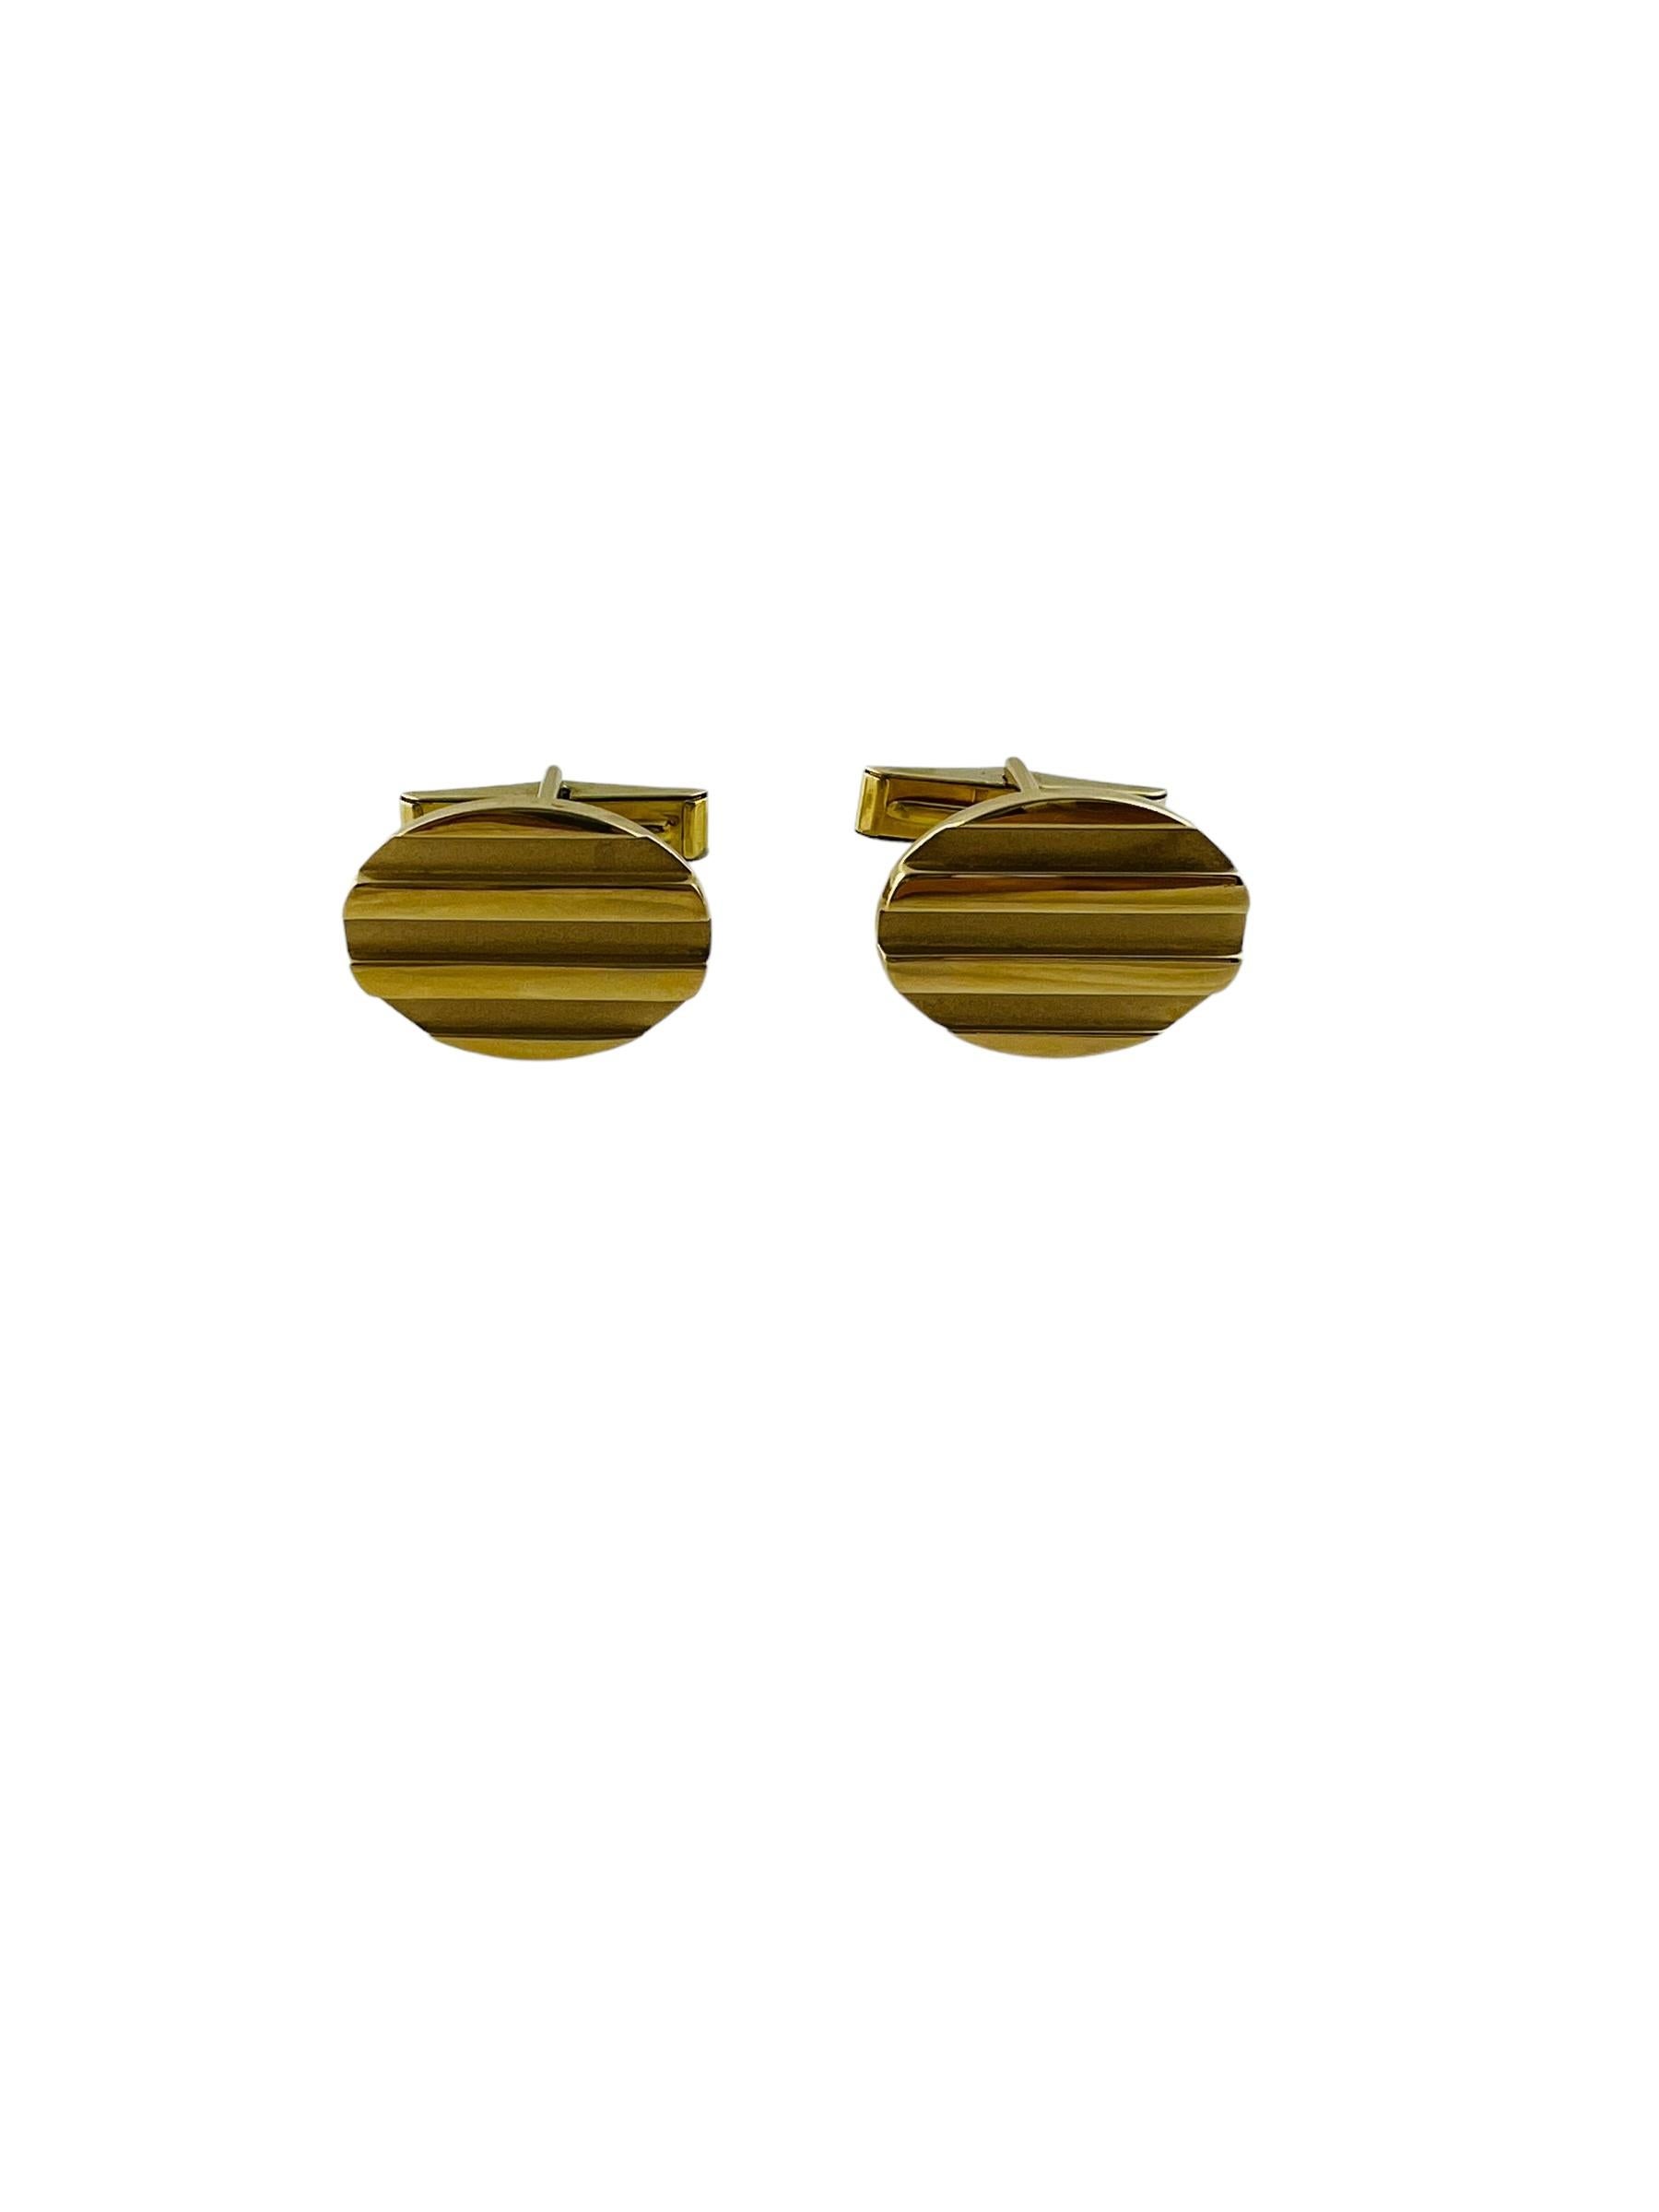 1995 Tiffany & Co. 18k Yellow Gold Oval Striped Cufflinks with Box For Sale 4